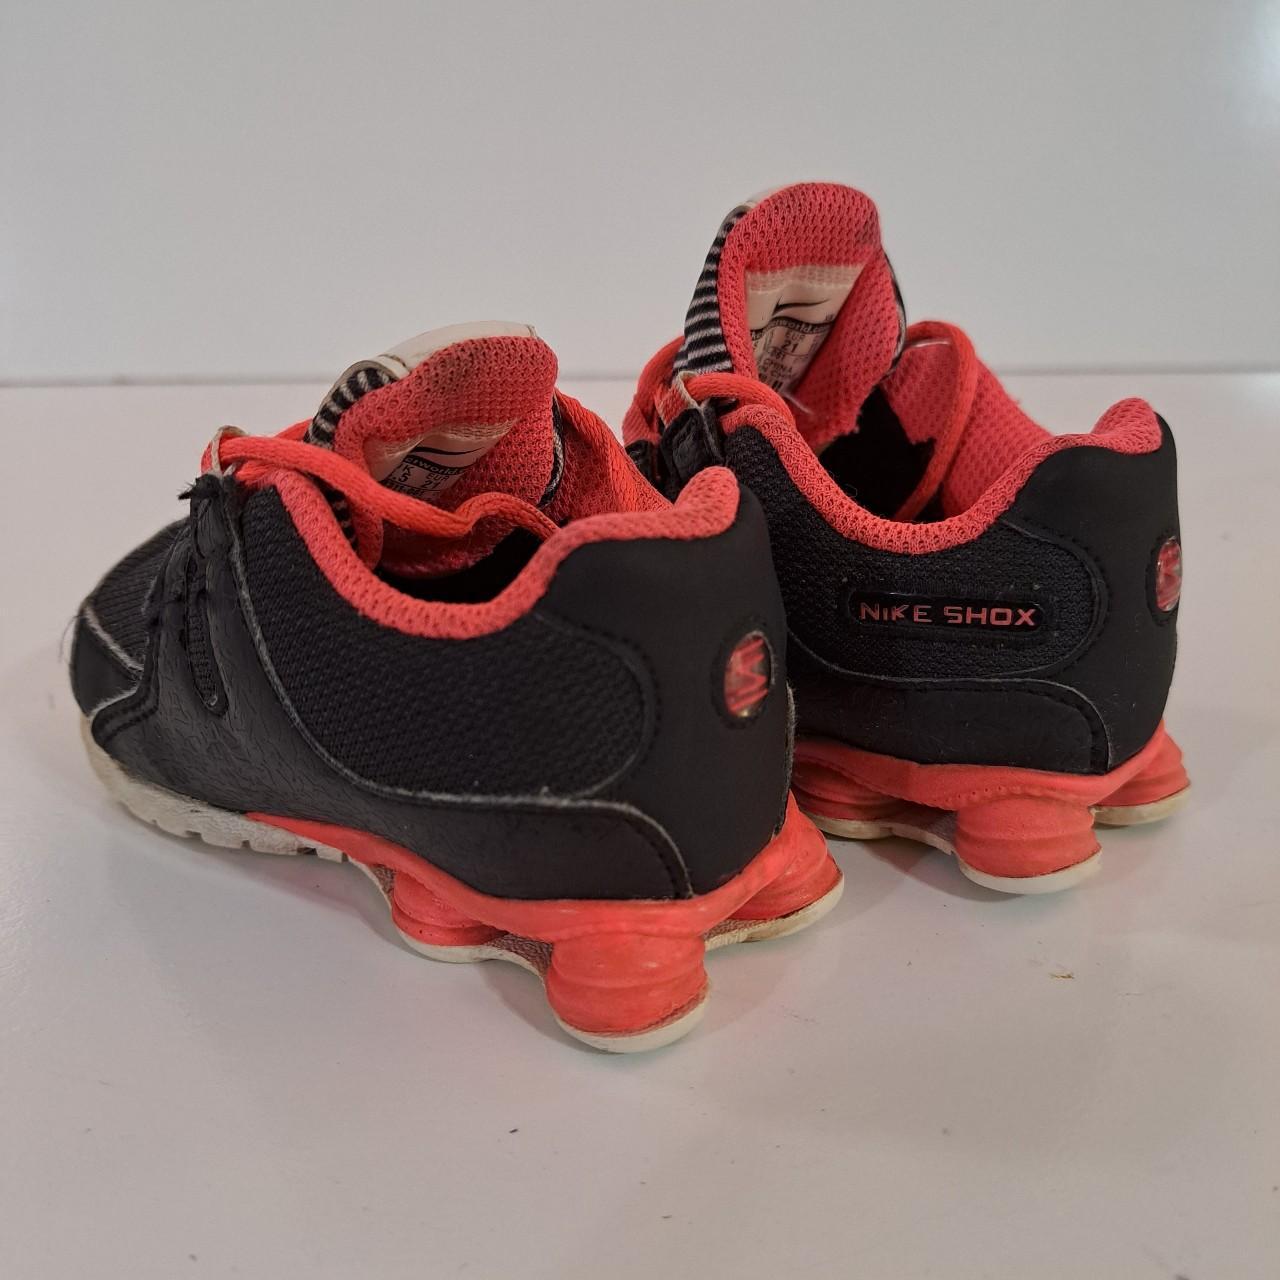 Product Image 3 - Baby Nike Shox

Black and pink